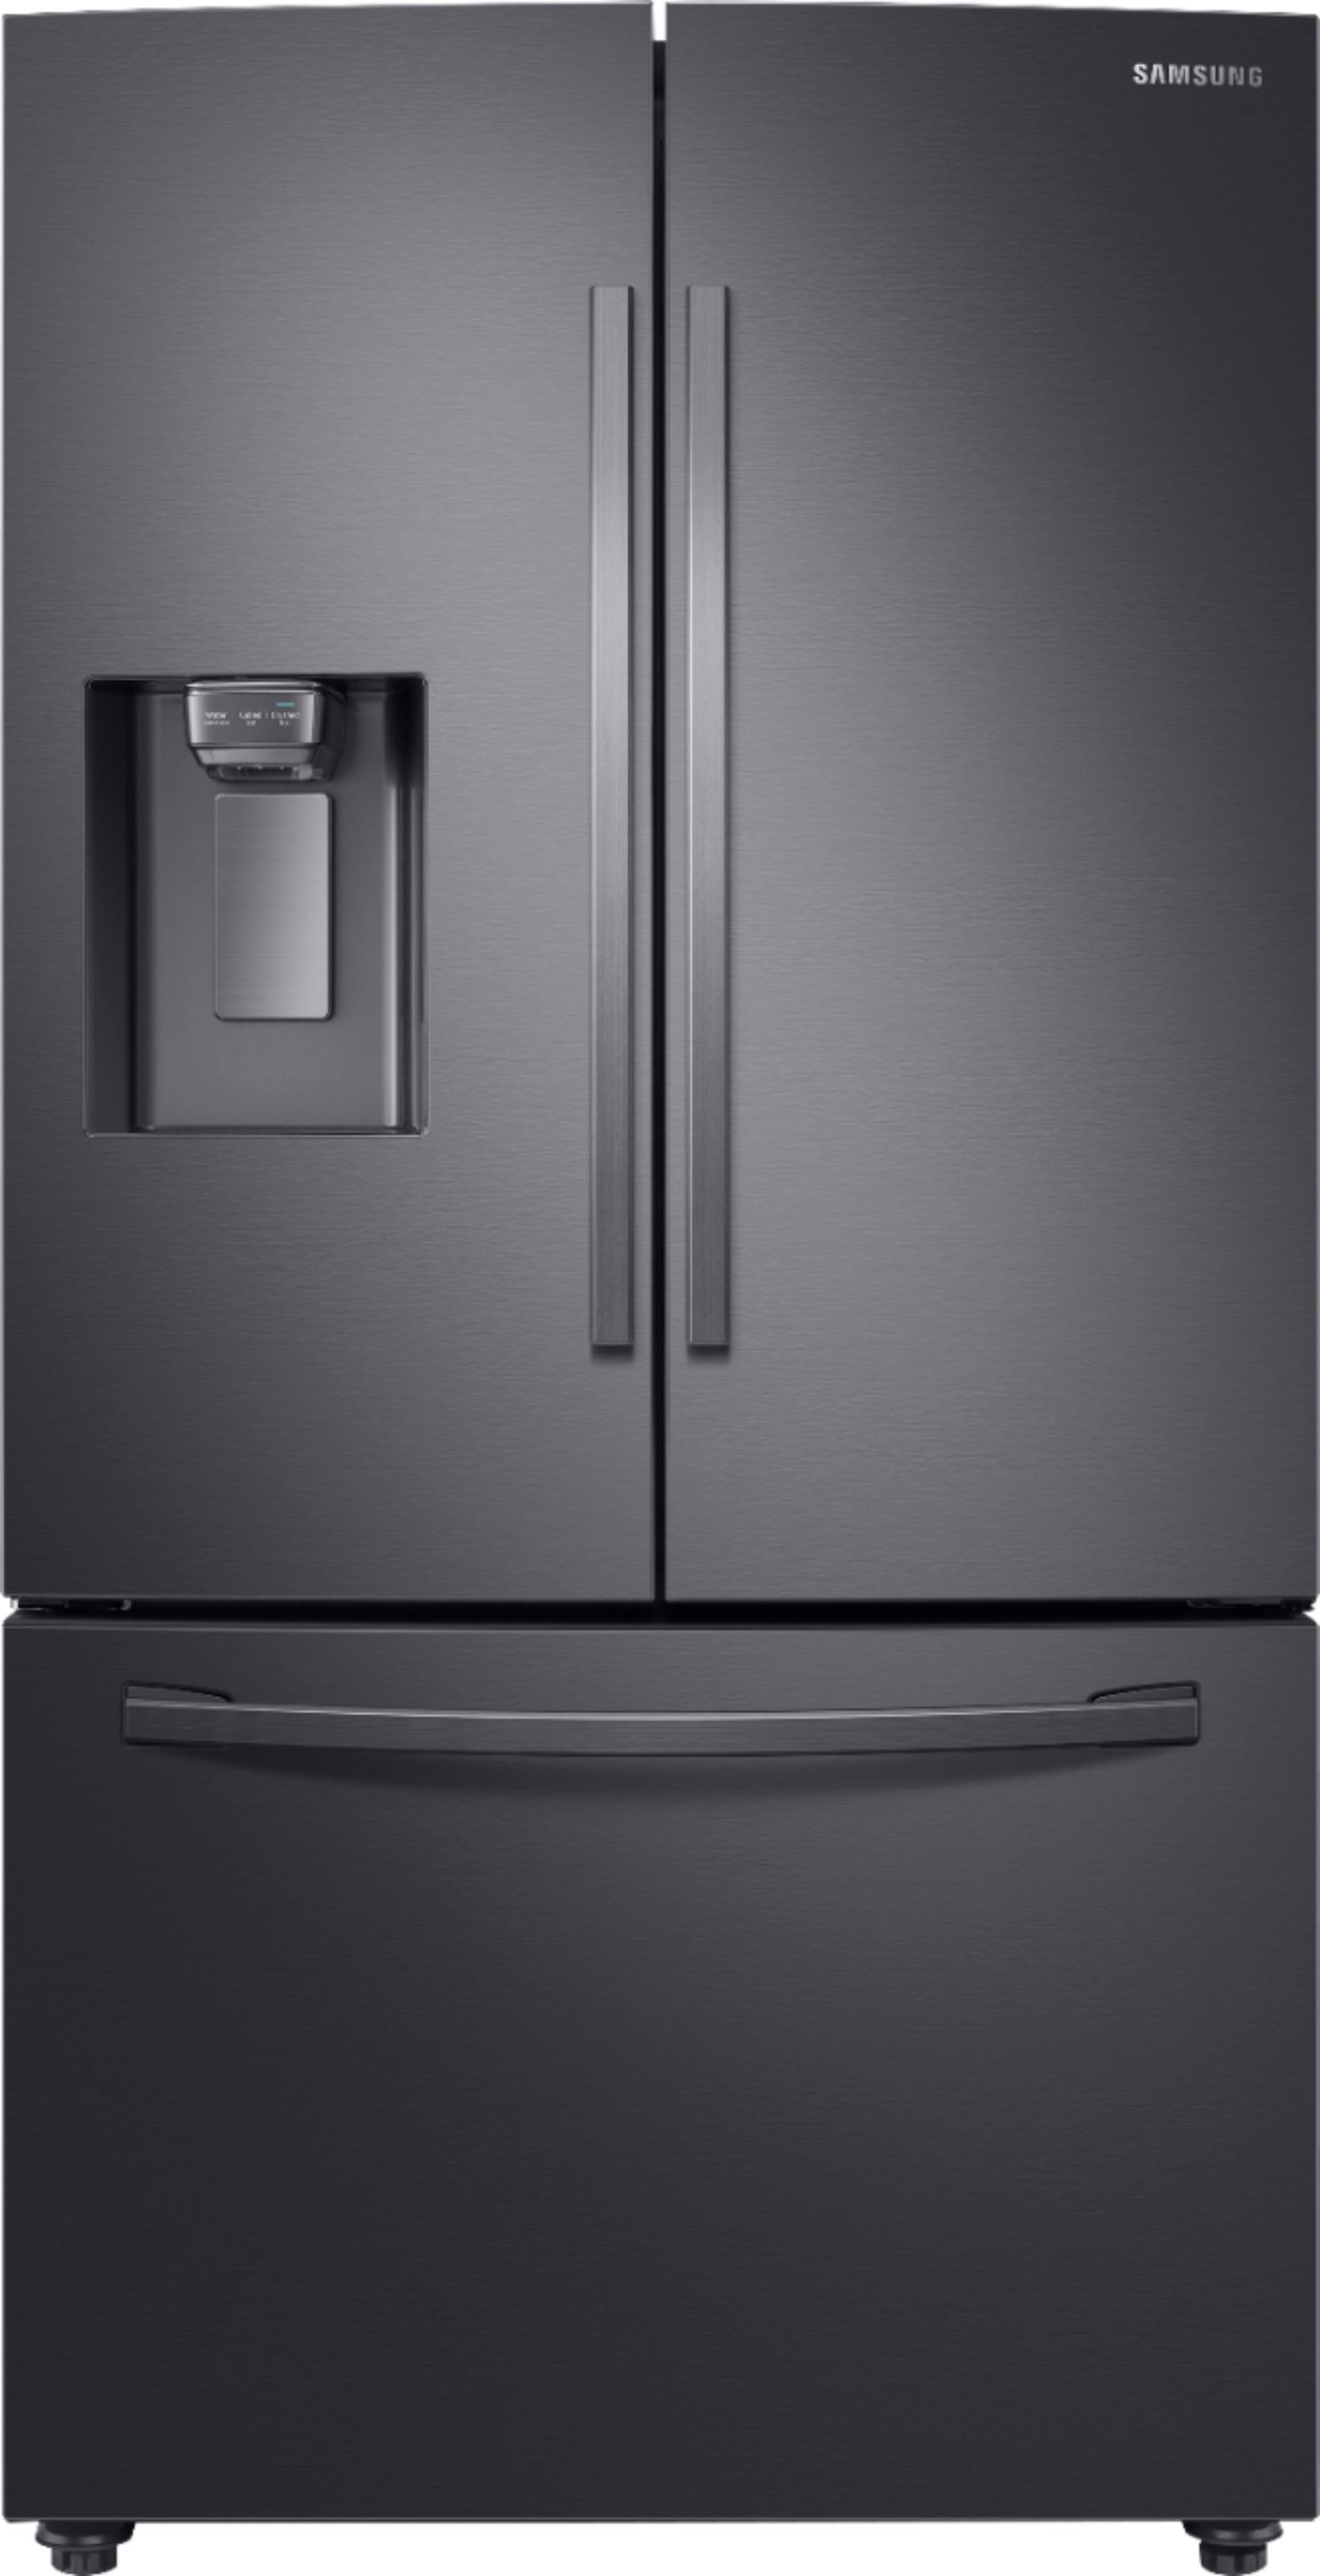 12+ How to clean outside of samsung stainless steel refrigerator ideas in 2021 